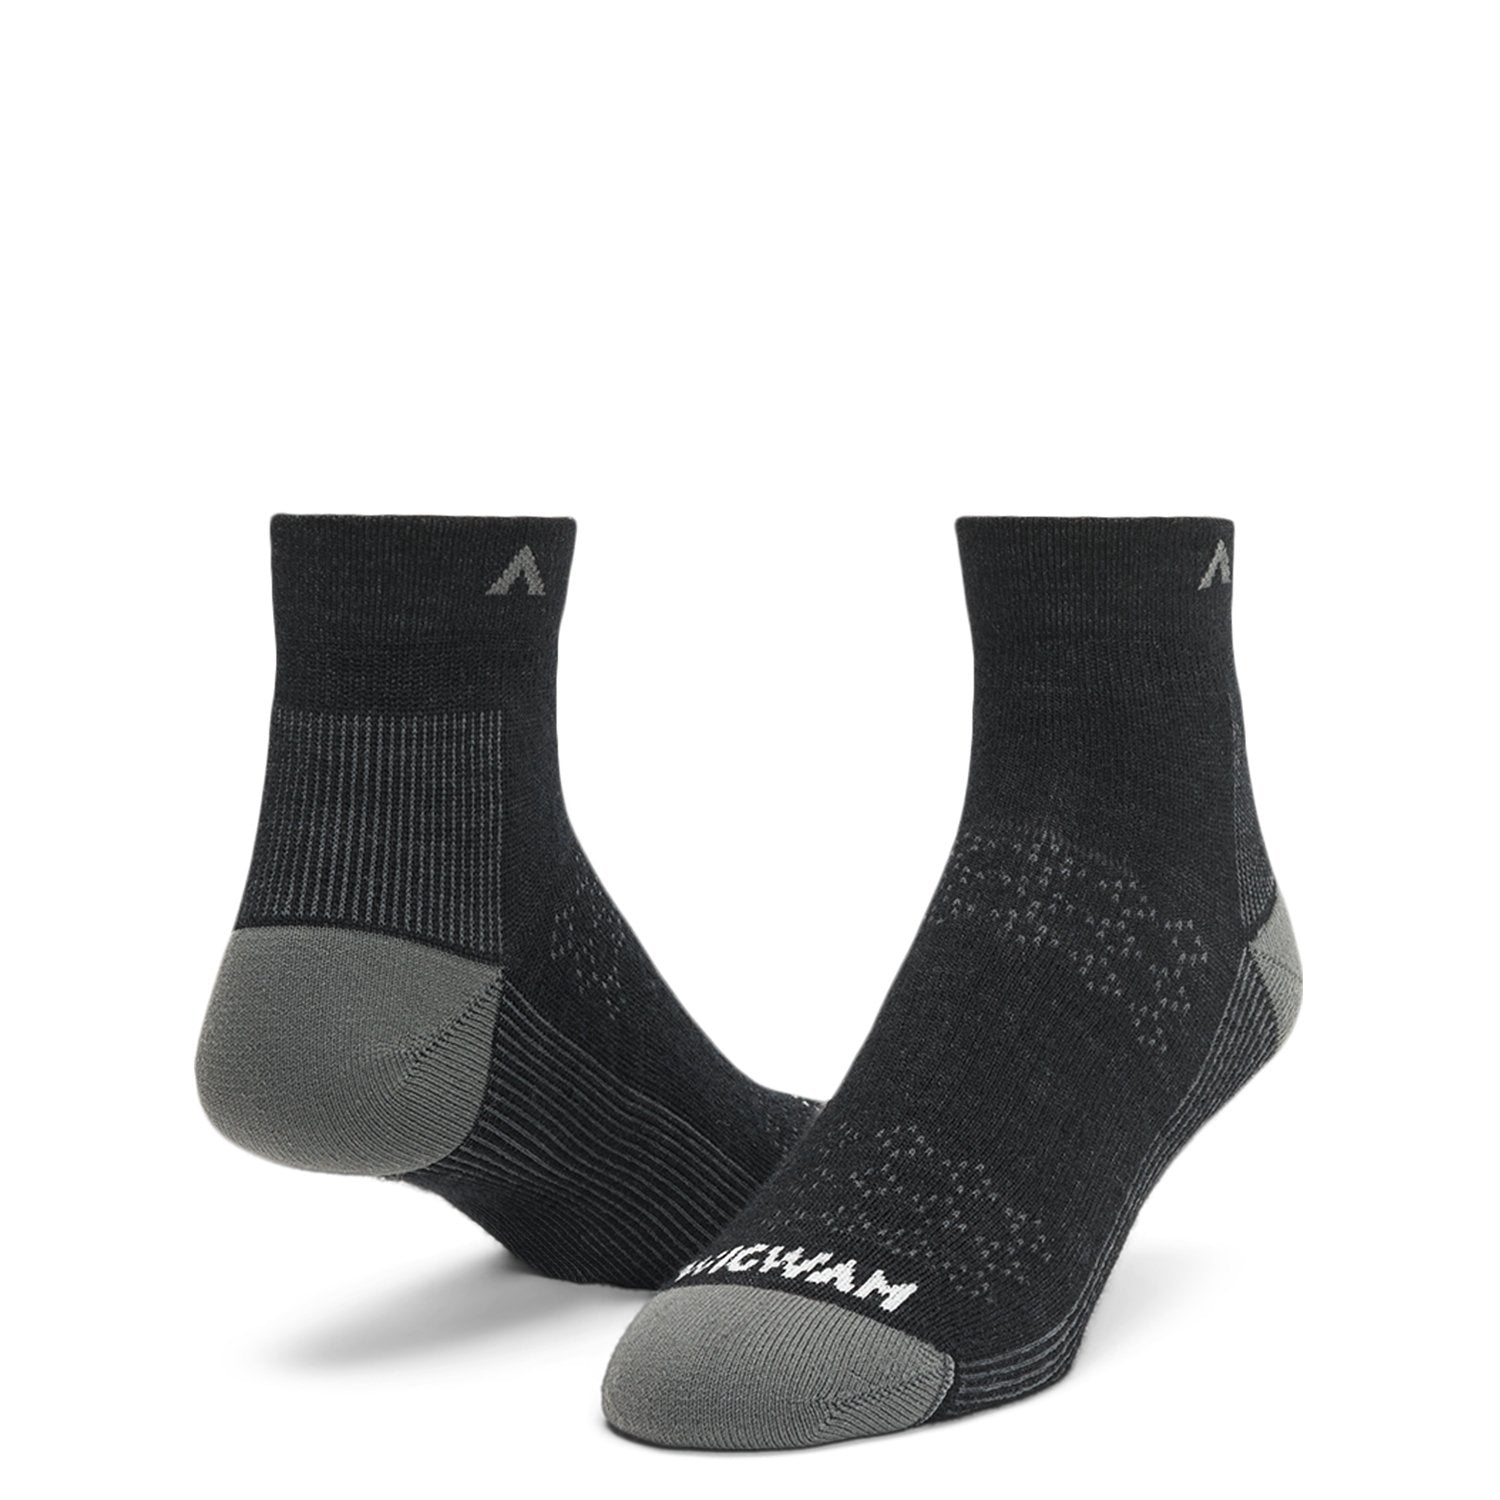 Arbor NXT Quarter - Black full product perspective - made in The USA Wigwam Socks